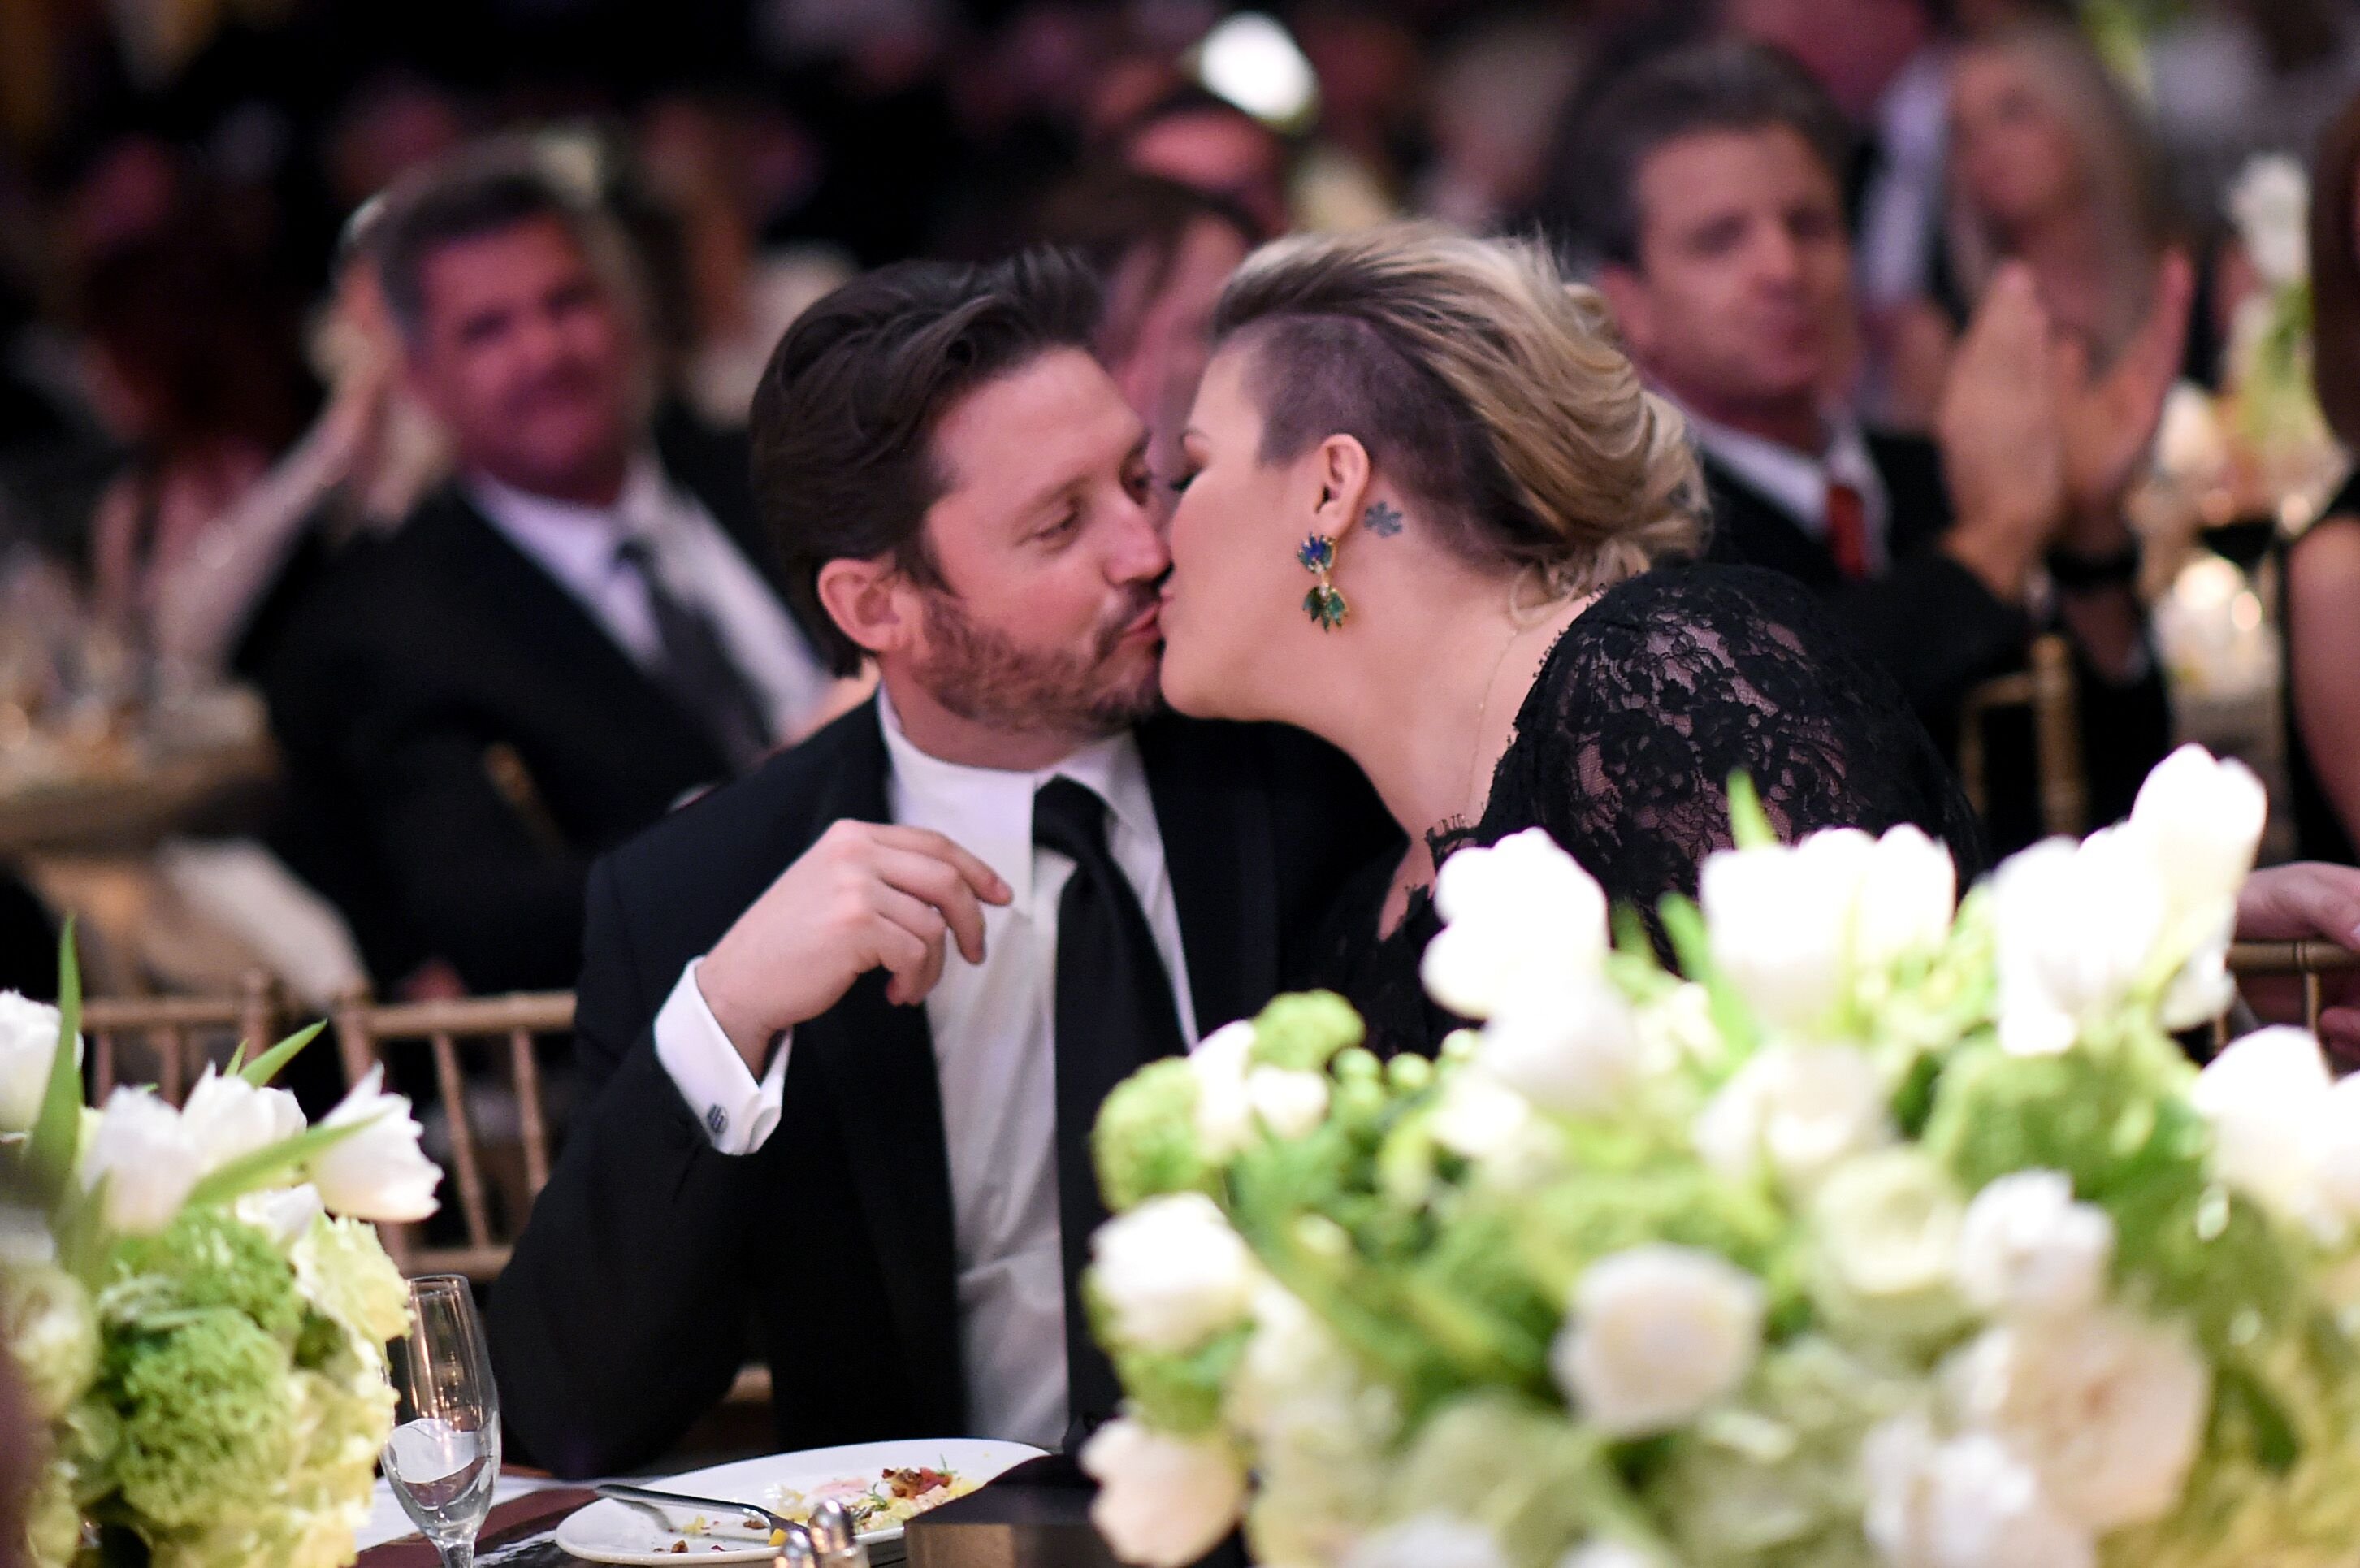 Brandon Blackstock and wife Kelly Clarkson share a kiss at Muhammad Ali's Celebrity Fight Night XXI at the JW Marriott Phoenix Desert Ridge Resort & Spa on March 28, 2015 | Photo: Getty Images